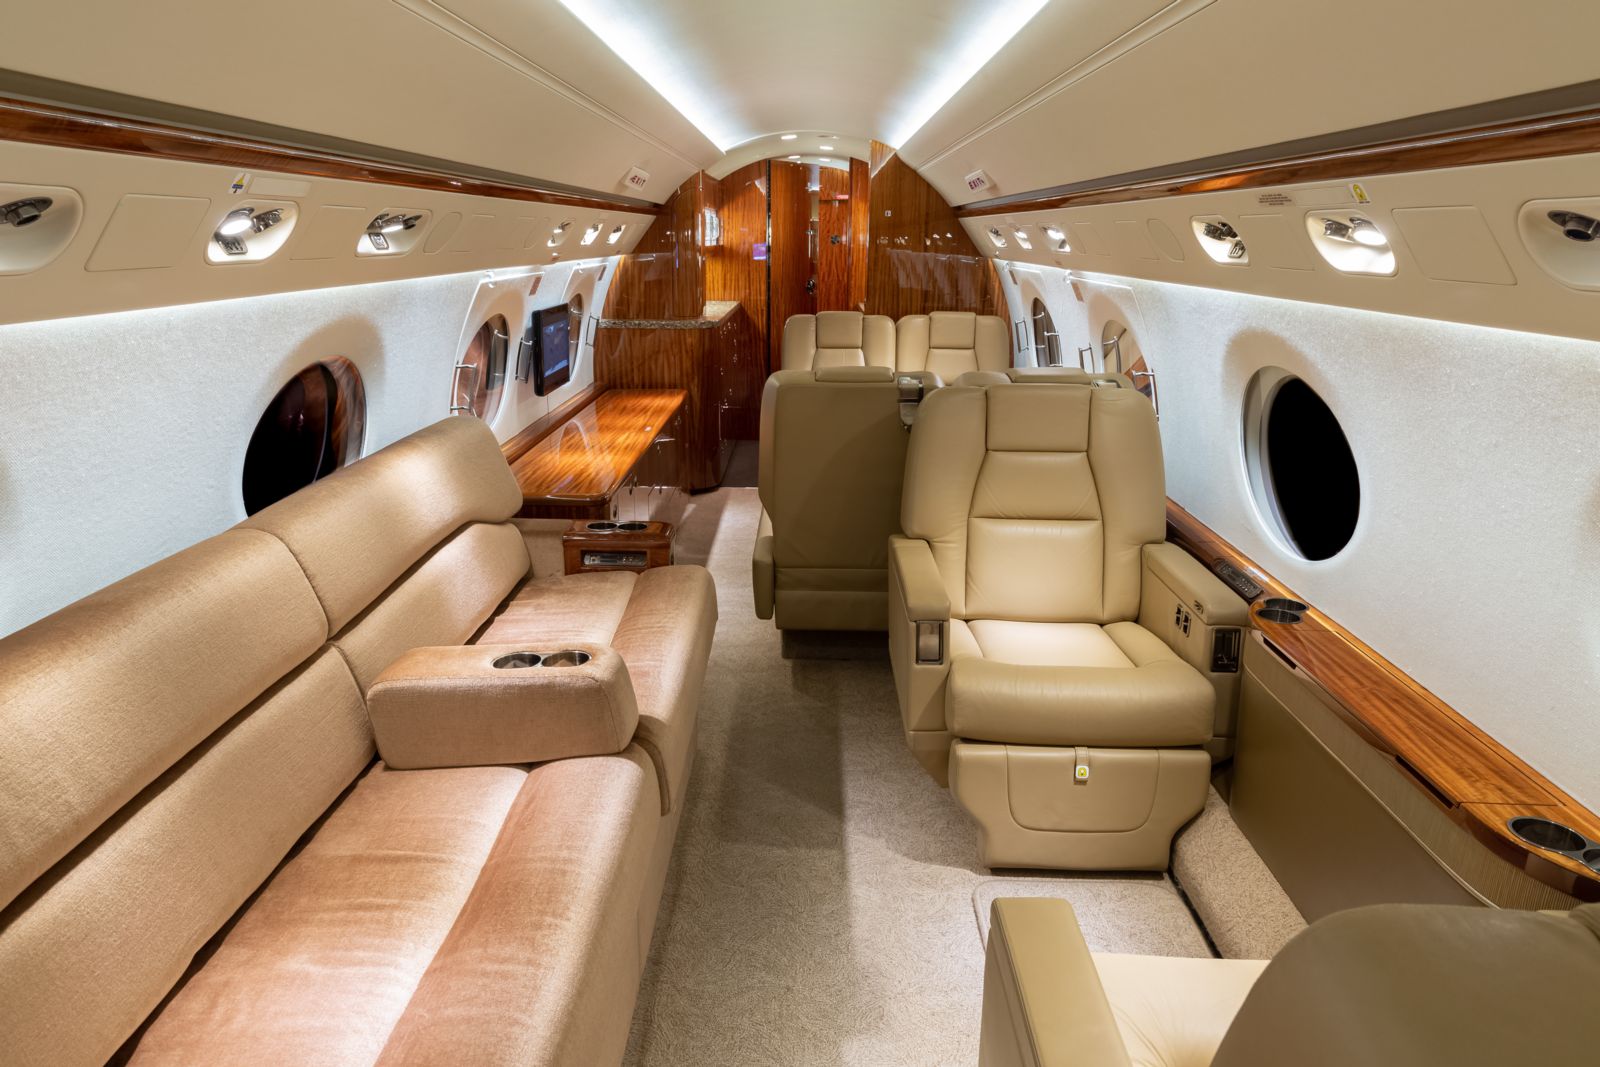 Gulfstream G550  S/N 5403 for sale | gallery image: /userfiles/images/G550_sn5403/mid%20aft.jpg